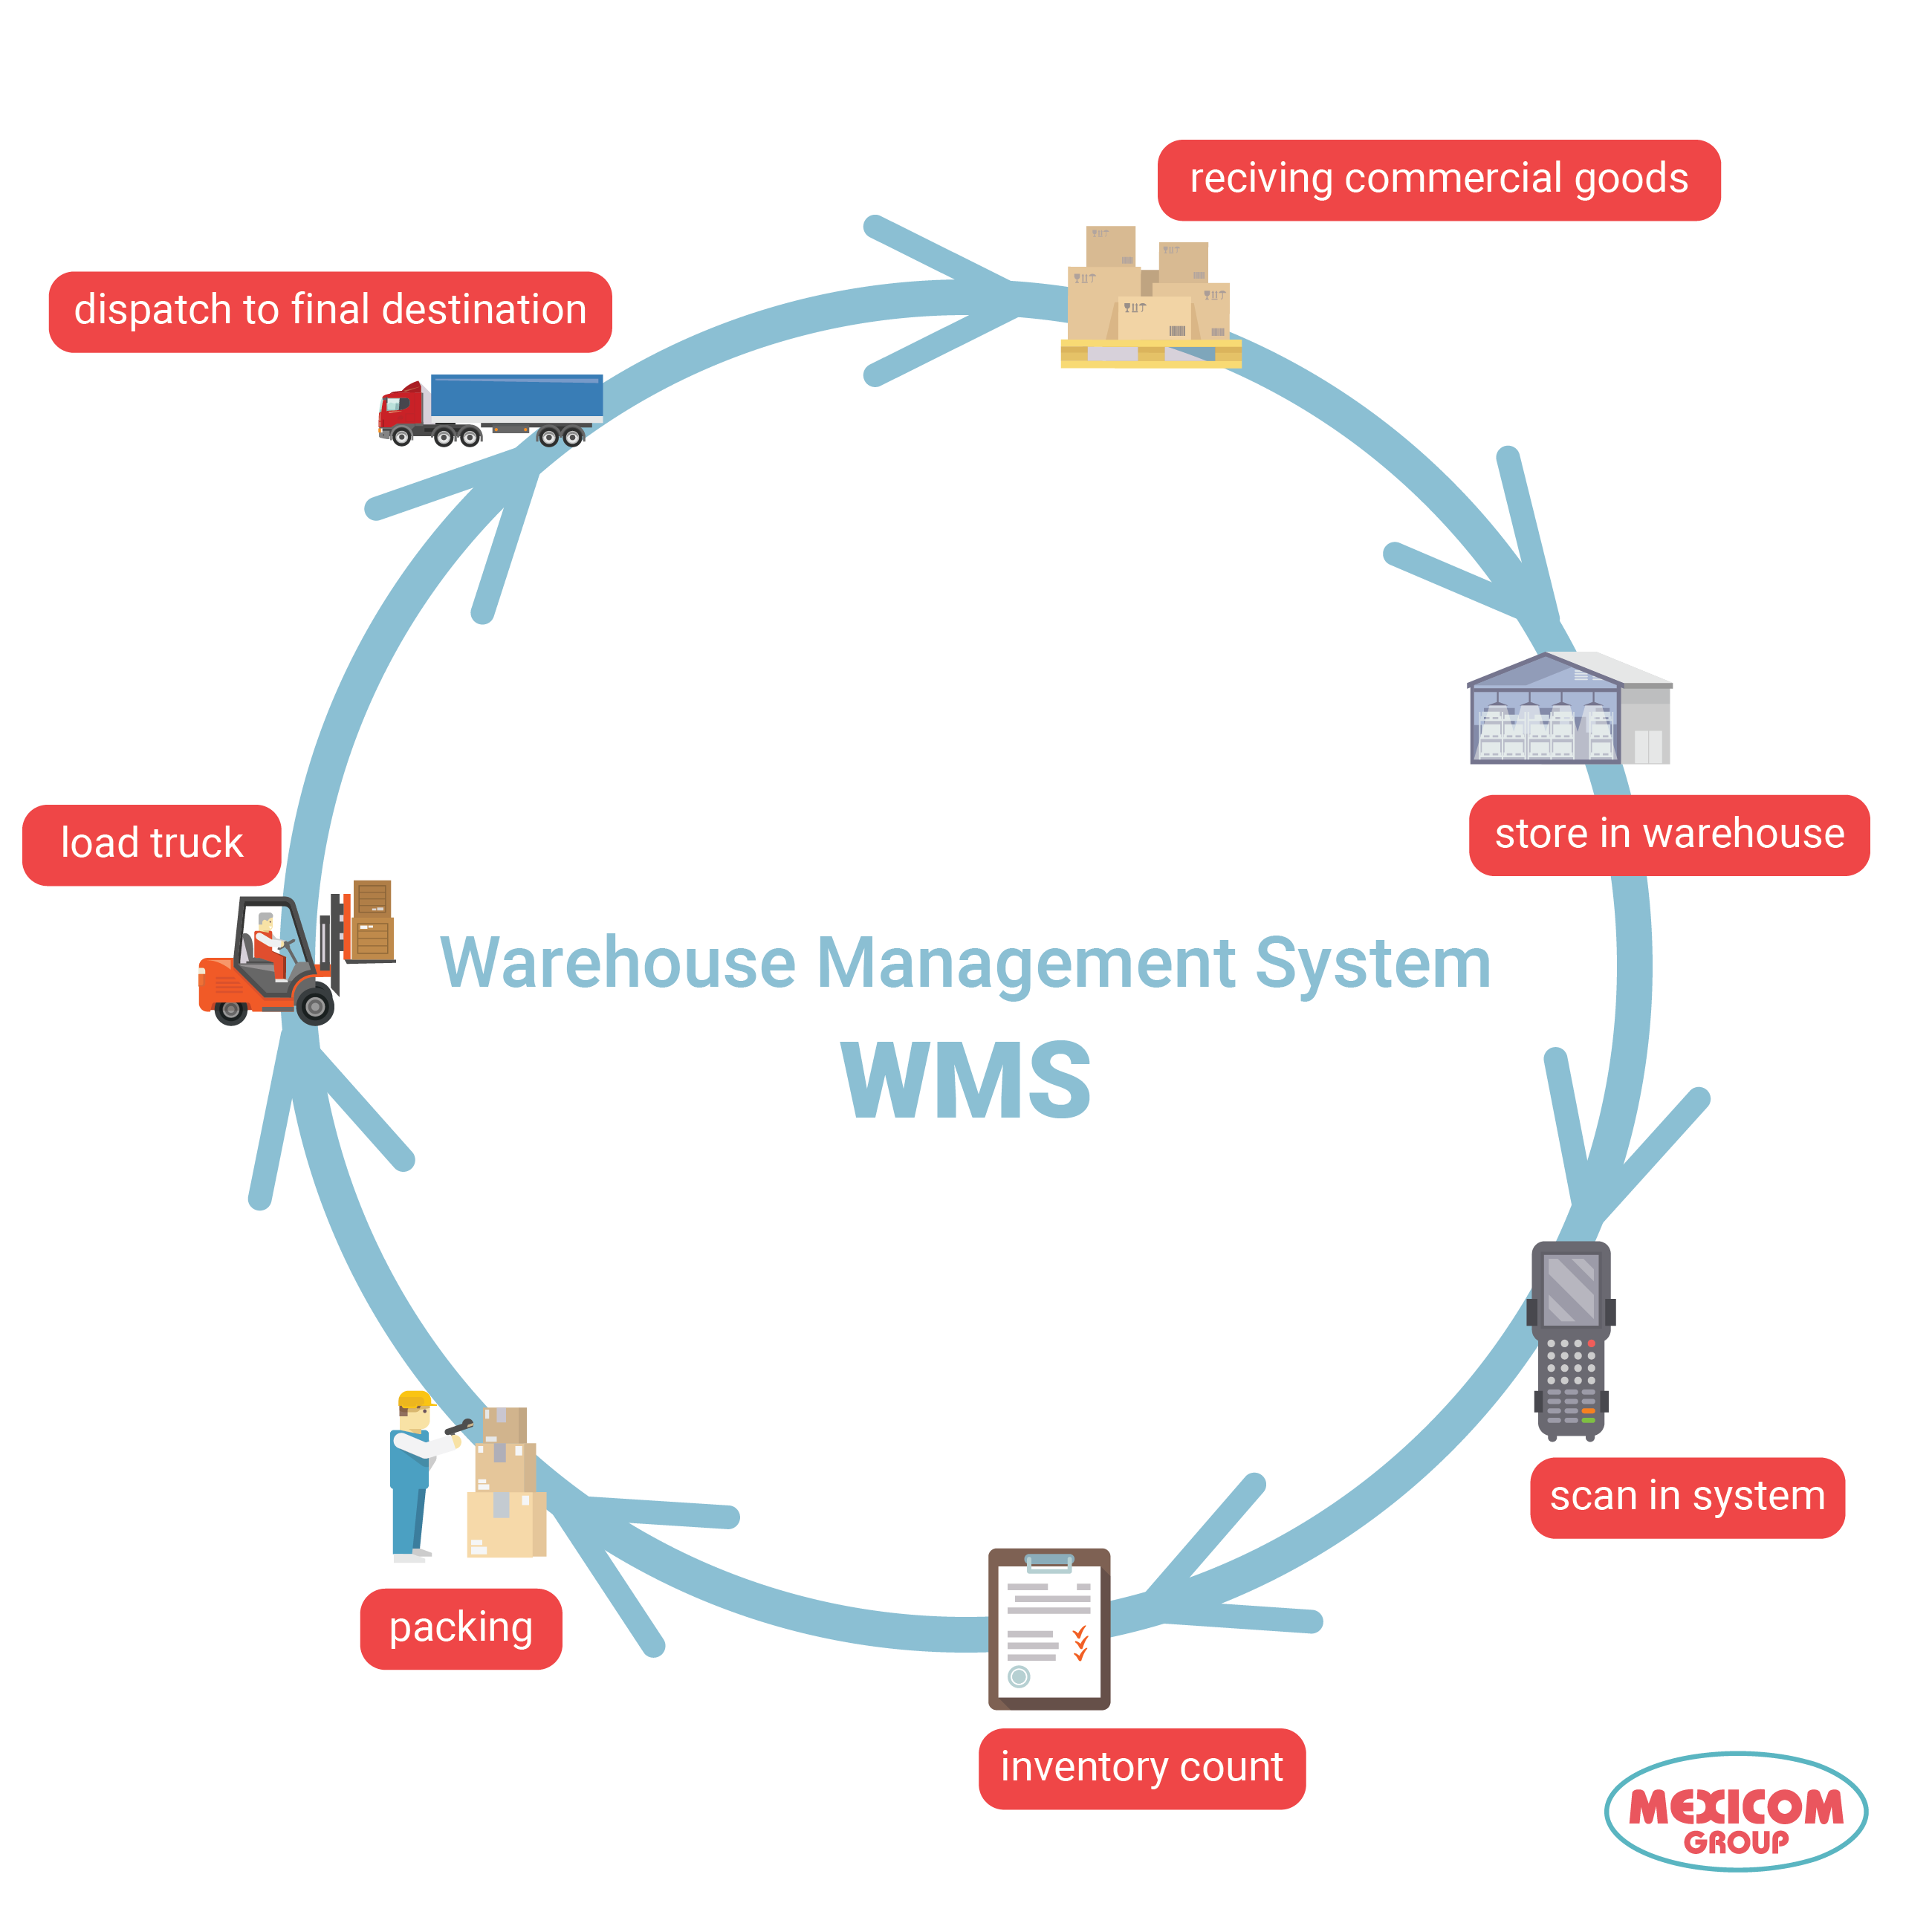 “WMS meaning: a warehouse management system